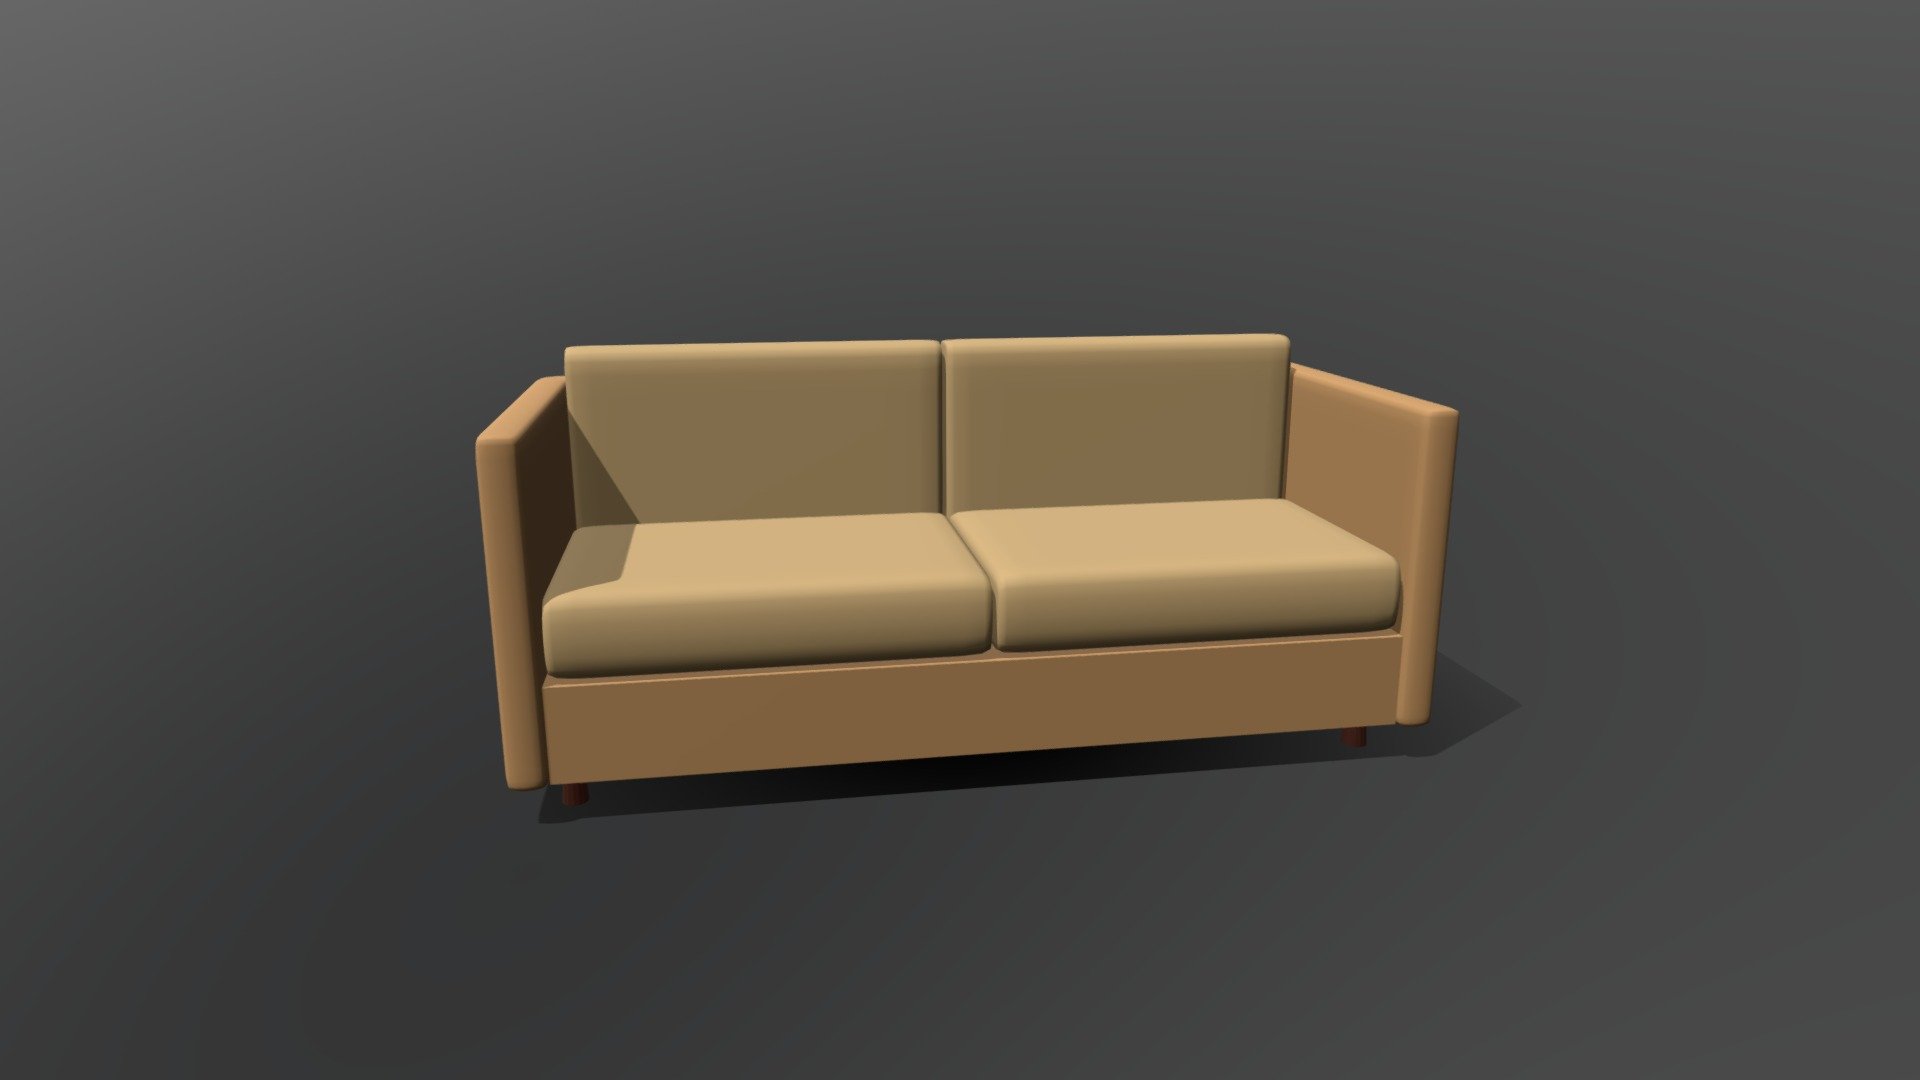 This is a 3d model of a cartoon couch. The couch was modeled and prepared for cartoon style renderings, background, general CG visualization etc presented as a mesh with quads only.

Verts : 4.774 Faces: 4.726

The 3d couch have simple materials with diffuse colors.

No ring, maps and no UVW mapping is available.

The original file was created in blender. You will receive a 3DS, OBJ, FBX, blend, DAE, Stl.

All preview images were rendered with Blender Cycles. Product is ready to render out-of-the-box. Please note that the lights, cameras, and background is only included in the .blend file. The model is clean and alone in the other provided files, centred at origin and has real-world scale 3d model